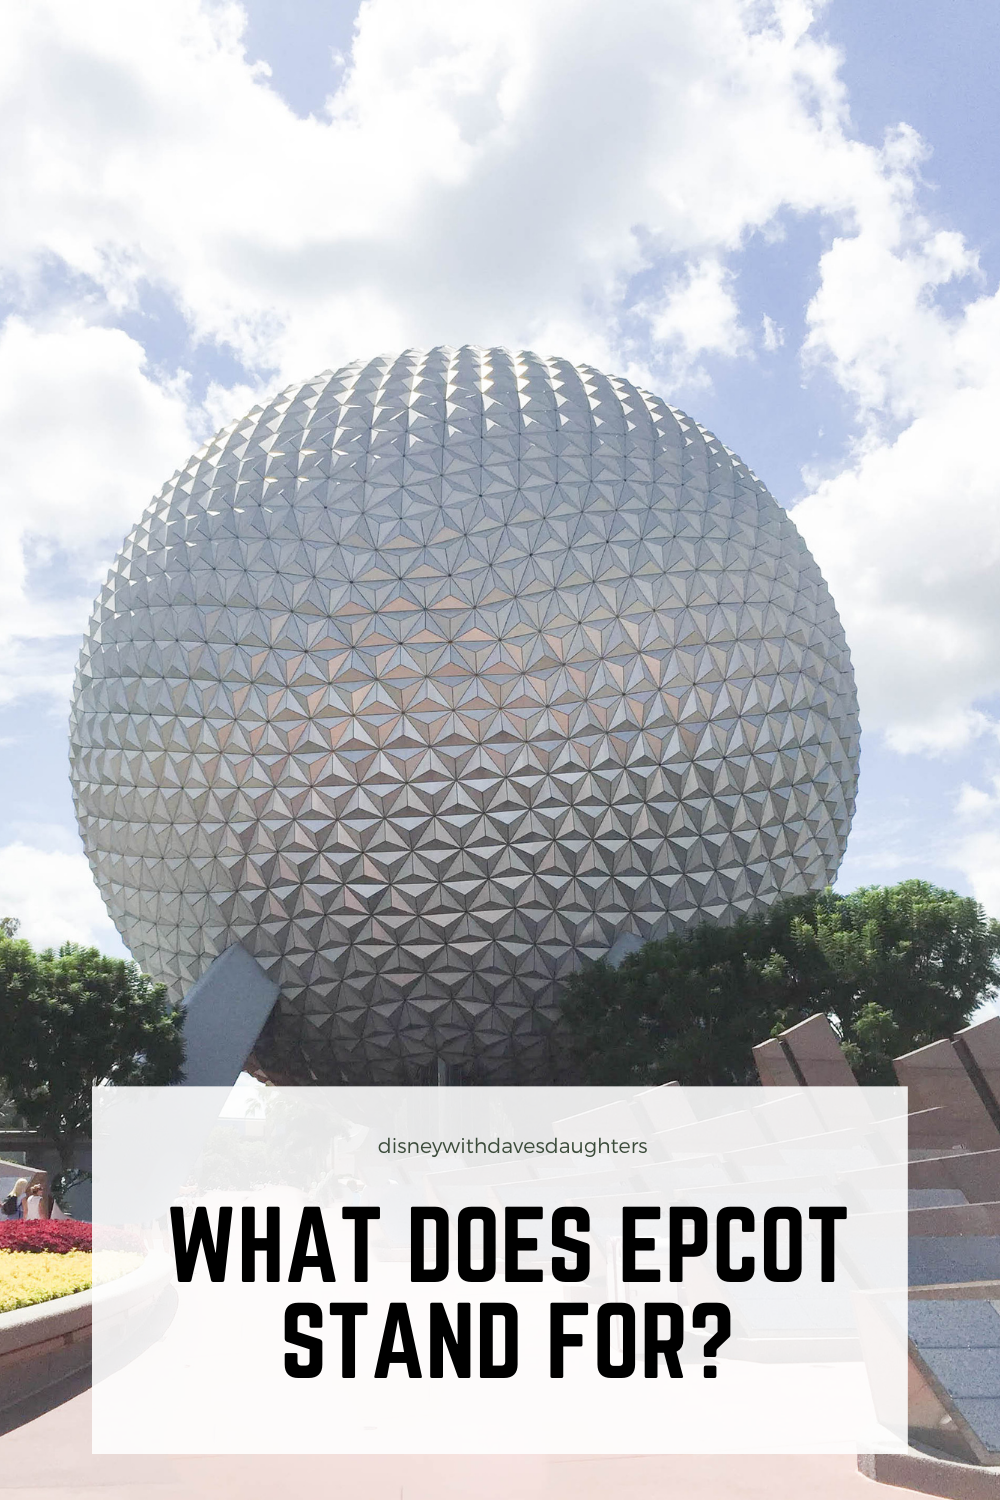 What Does Epcot Stand For? - Disney With Dave's Daughters